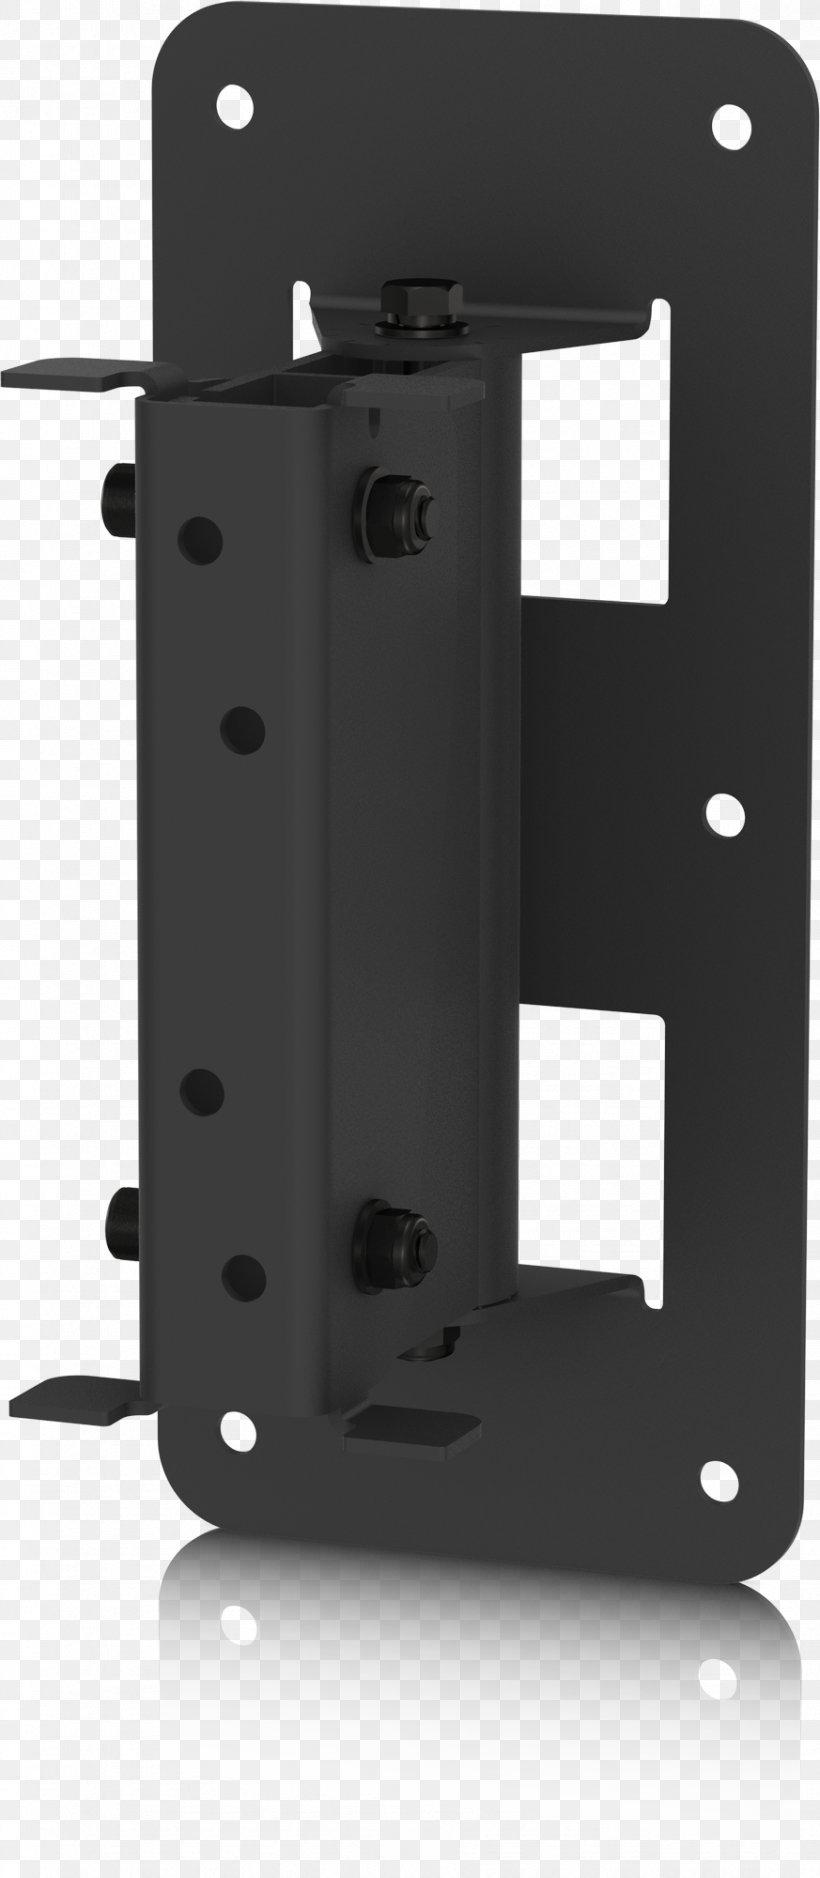 Loudspeaker Tannoy Product Design Angle, PNG, 873x2000px, Loudspeaker, Computer Hardware, Hardware, Hardware Accessory, Tannoy Download Free